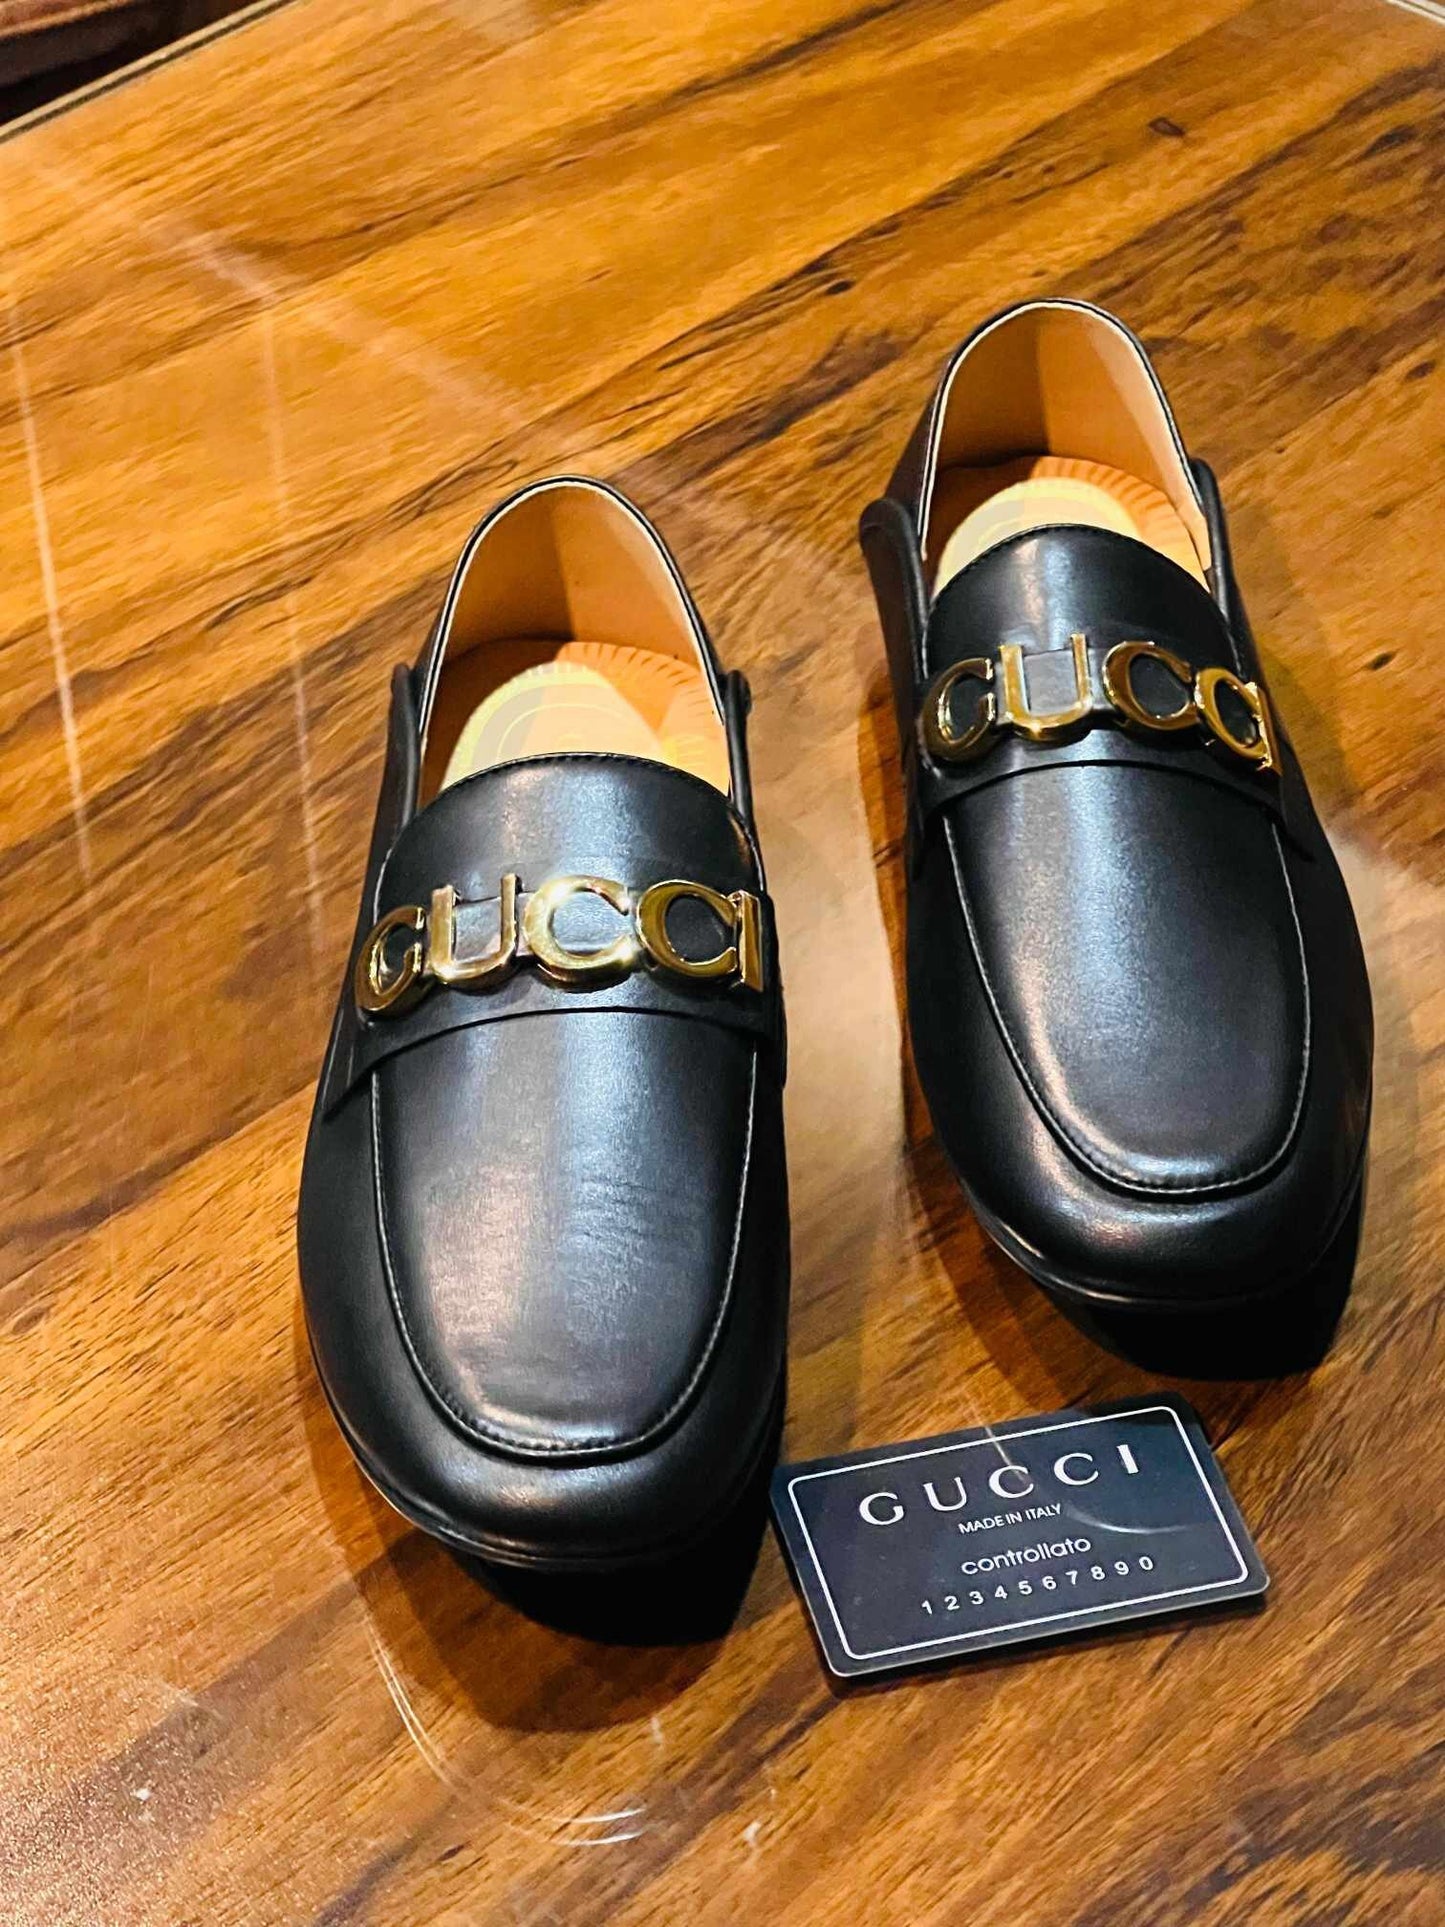 Gucci Shoes: The Ultimate Status Symbol